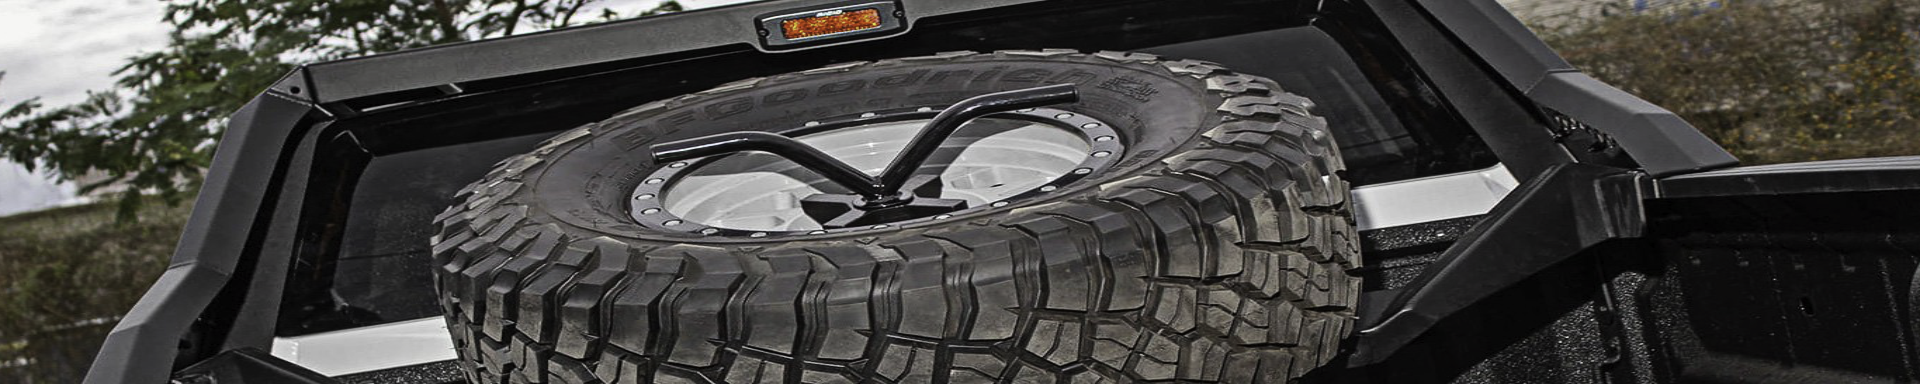 Truck Bed Mounted Spare Tire Carriers | GarageAndFab.com | Munro Industries gf-100103080608